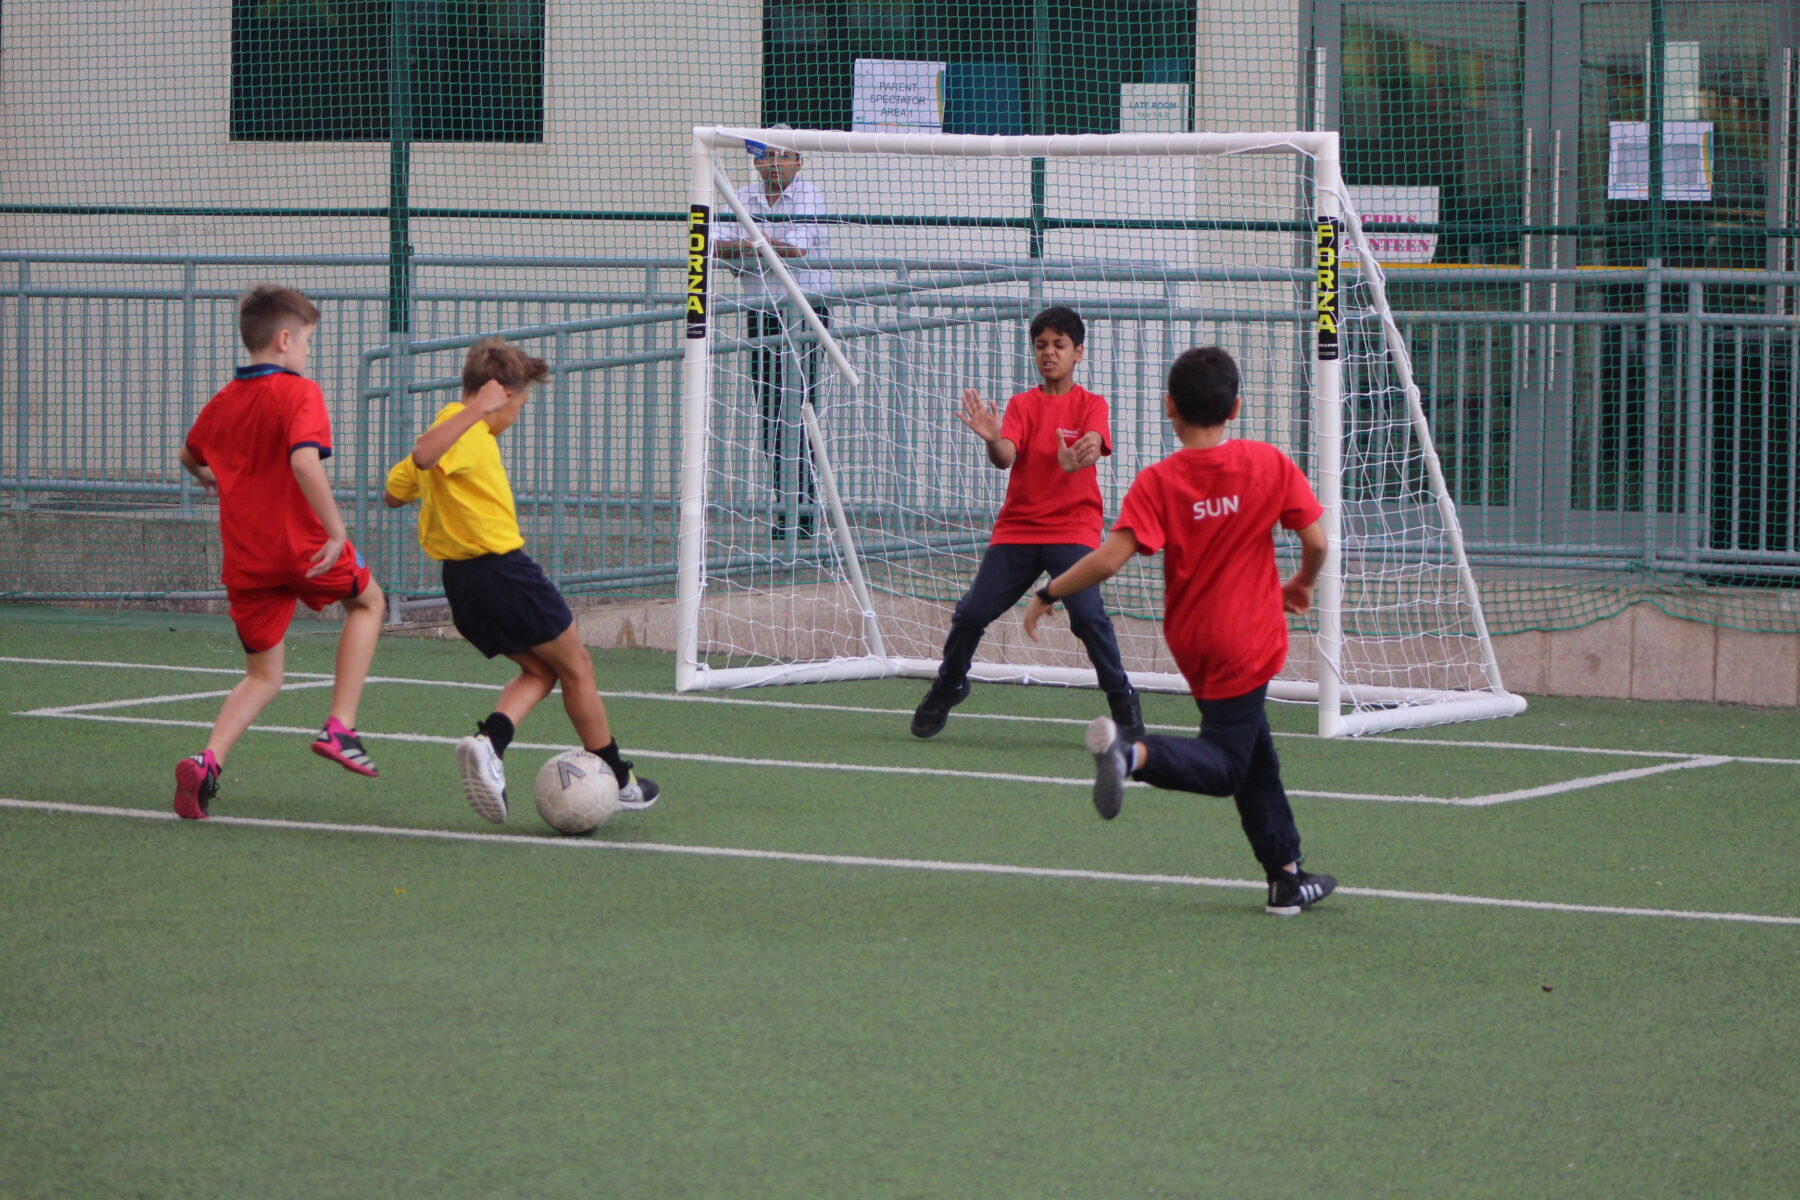 RBS hosted its very first Inter-House Tournament